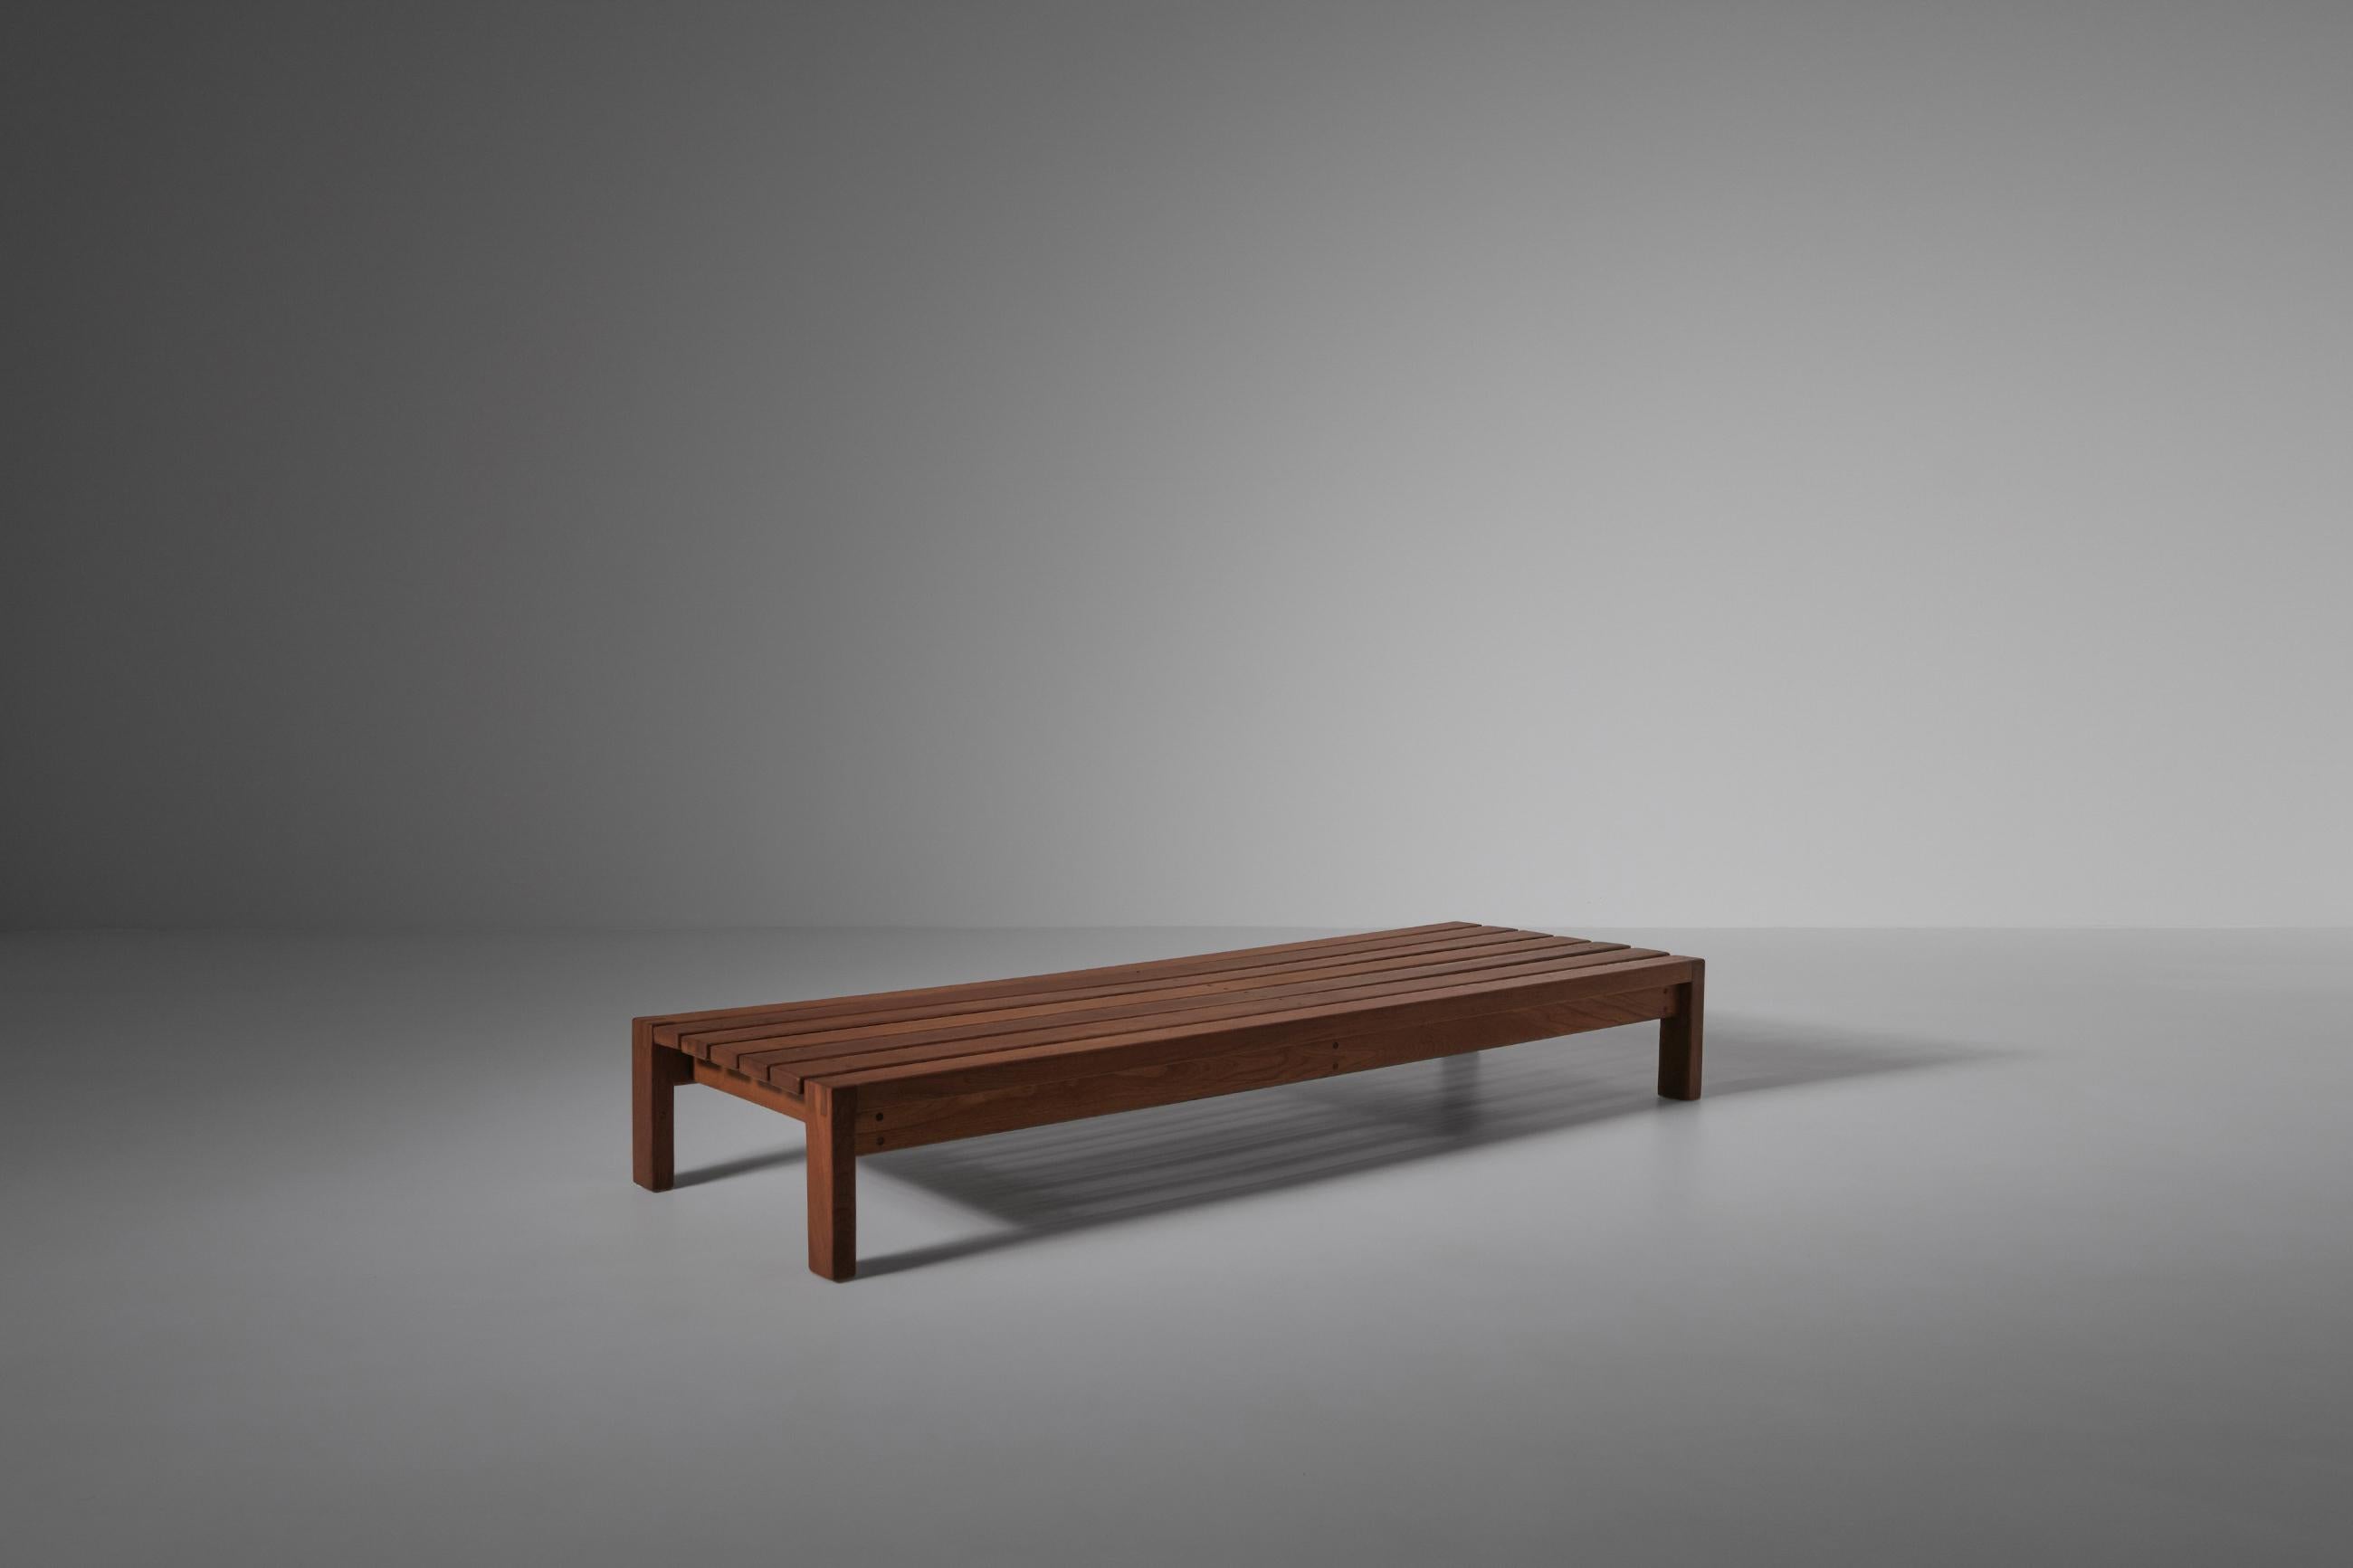 Solid Elm bench or large coffee table in the style of Pierre Chapo, France 1960s. Made of solid warm colored Elmwood with a beautiful exposed grain, giving the bench a rich, warm and natural appearance. All handcrafted with great details showing the